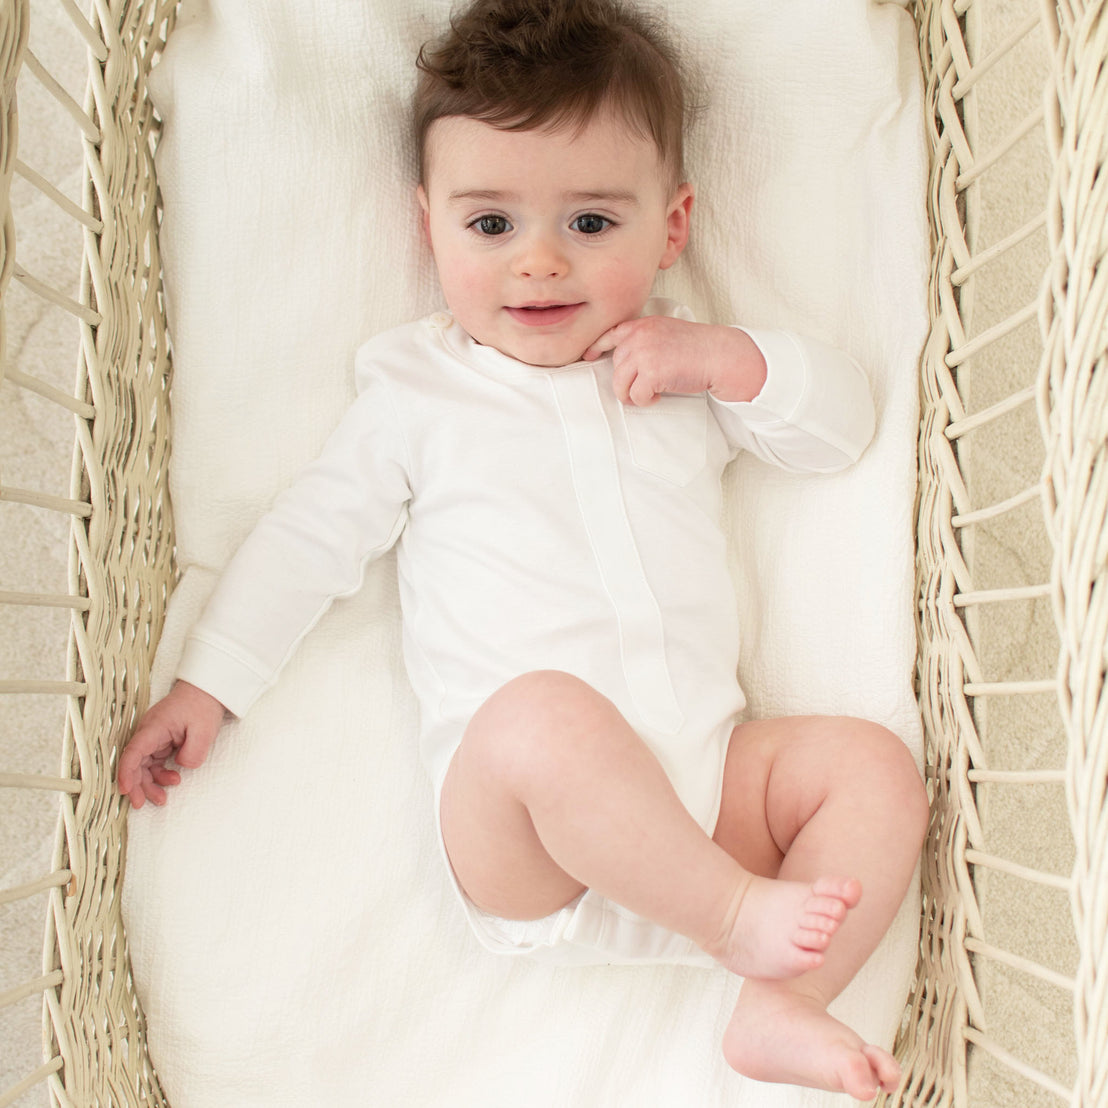 A baby sits in a cradle and is wearing a white onesie